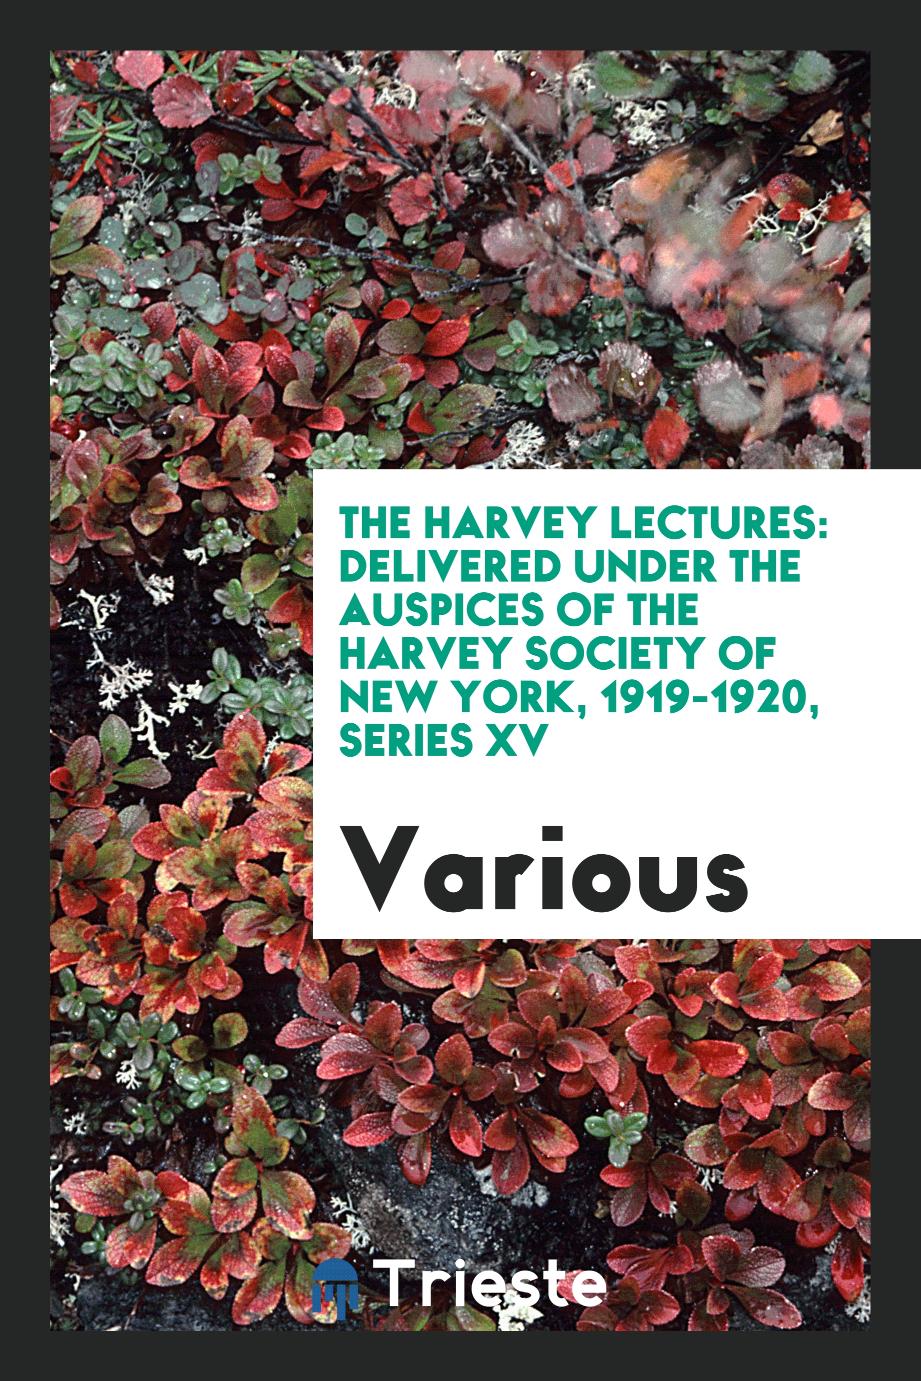 The Harvey Lectures: Delivered Under the Auspices of the Harvey Society of New York, 1919-1920, Series XV